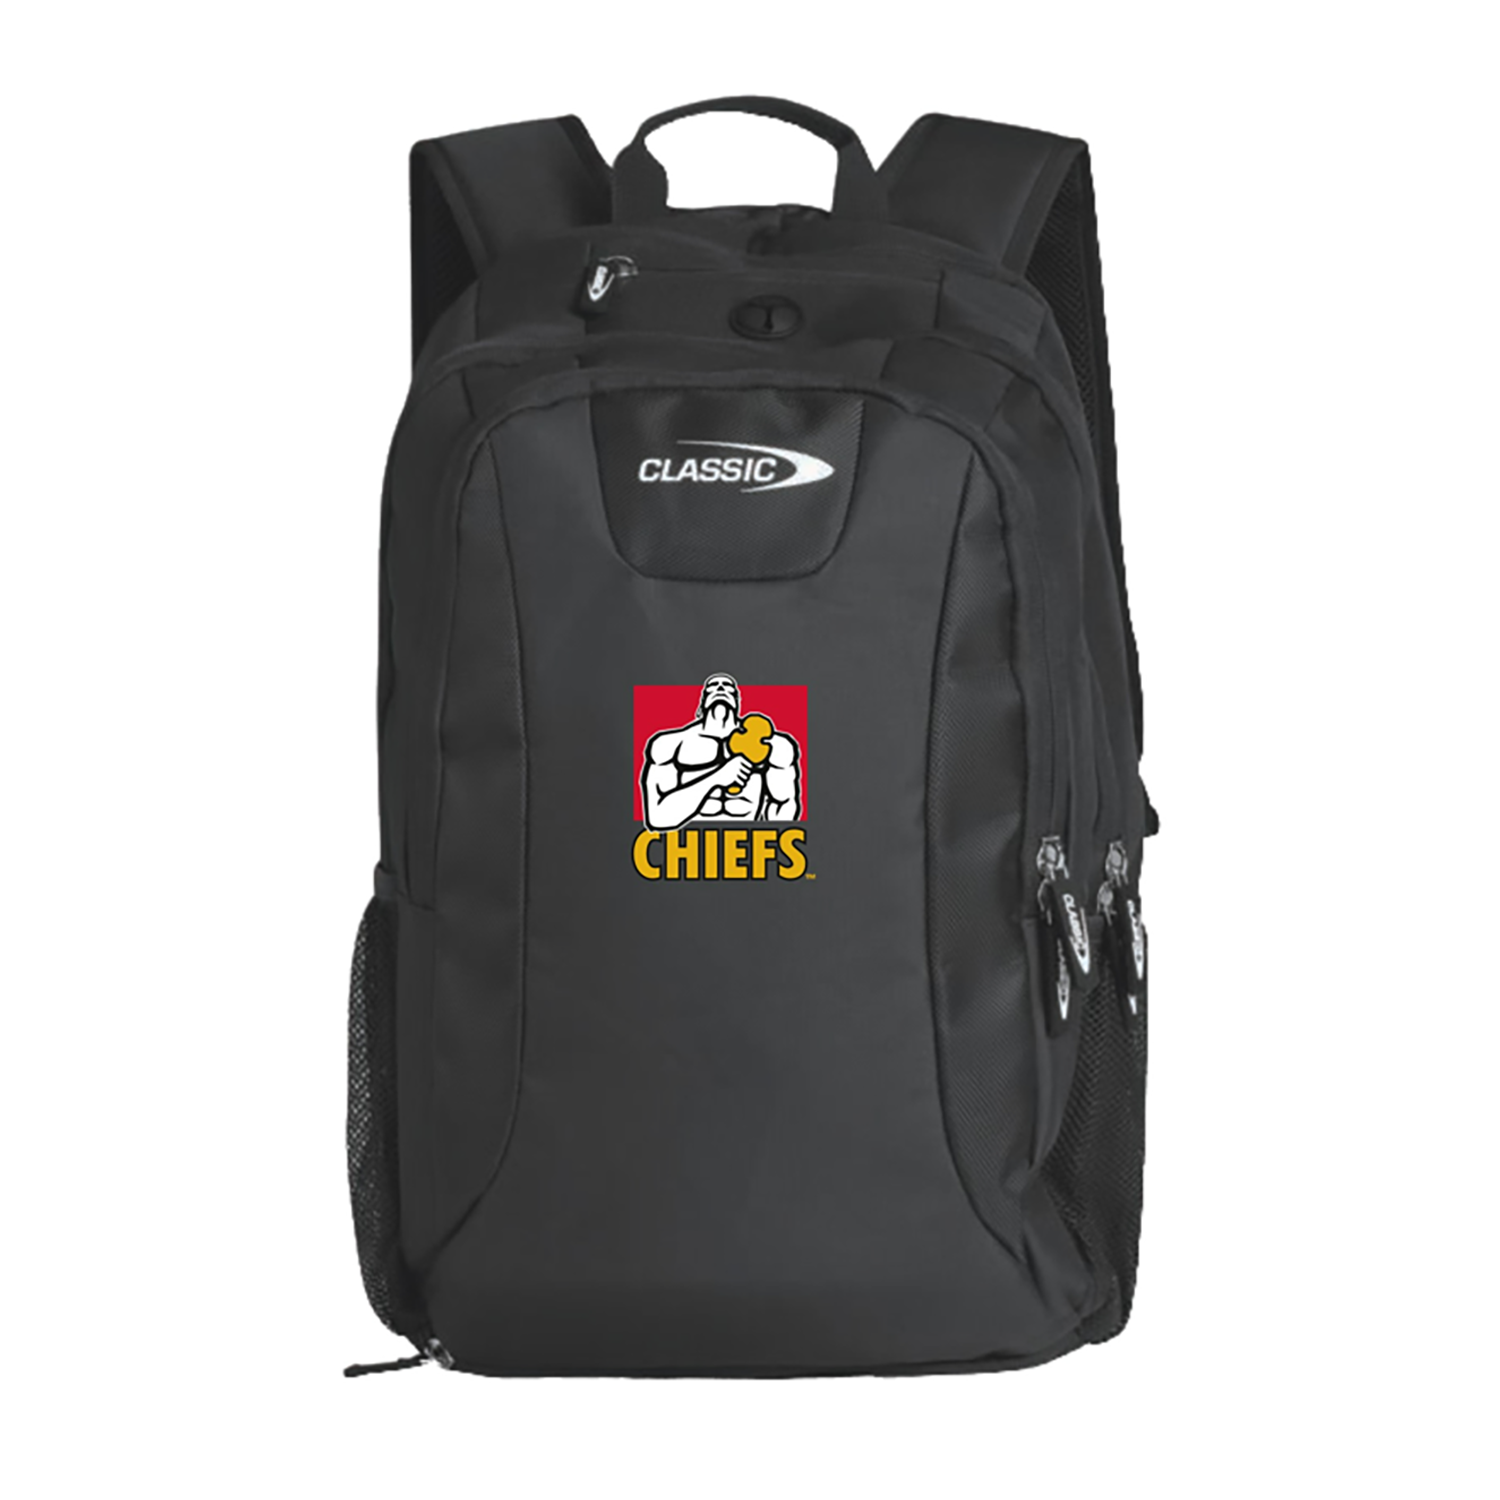 Chiefs Backpack